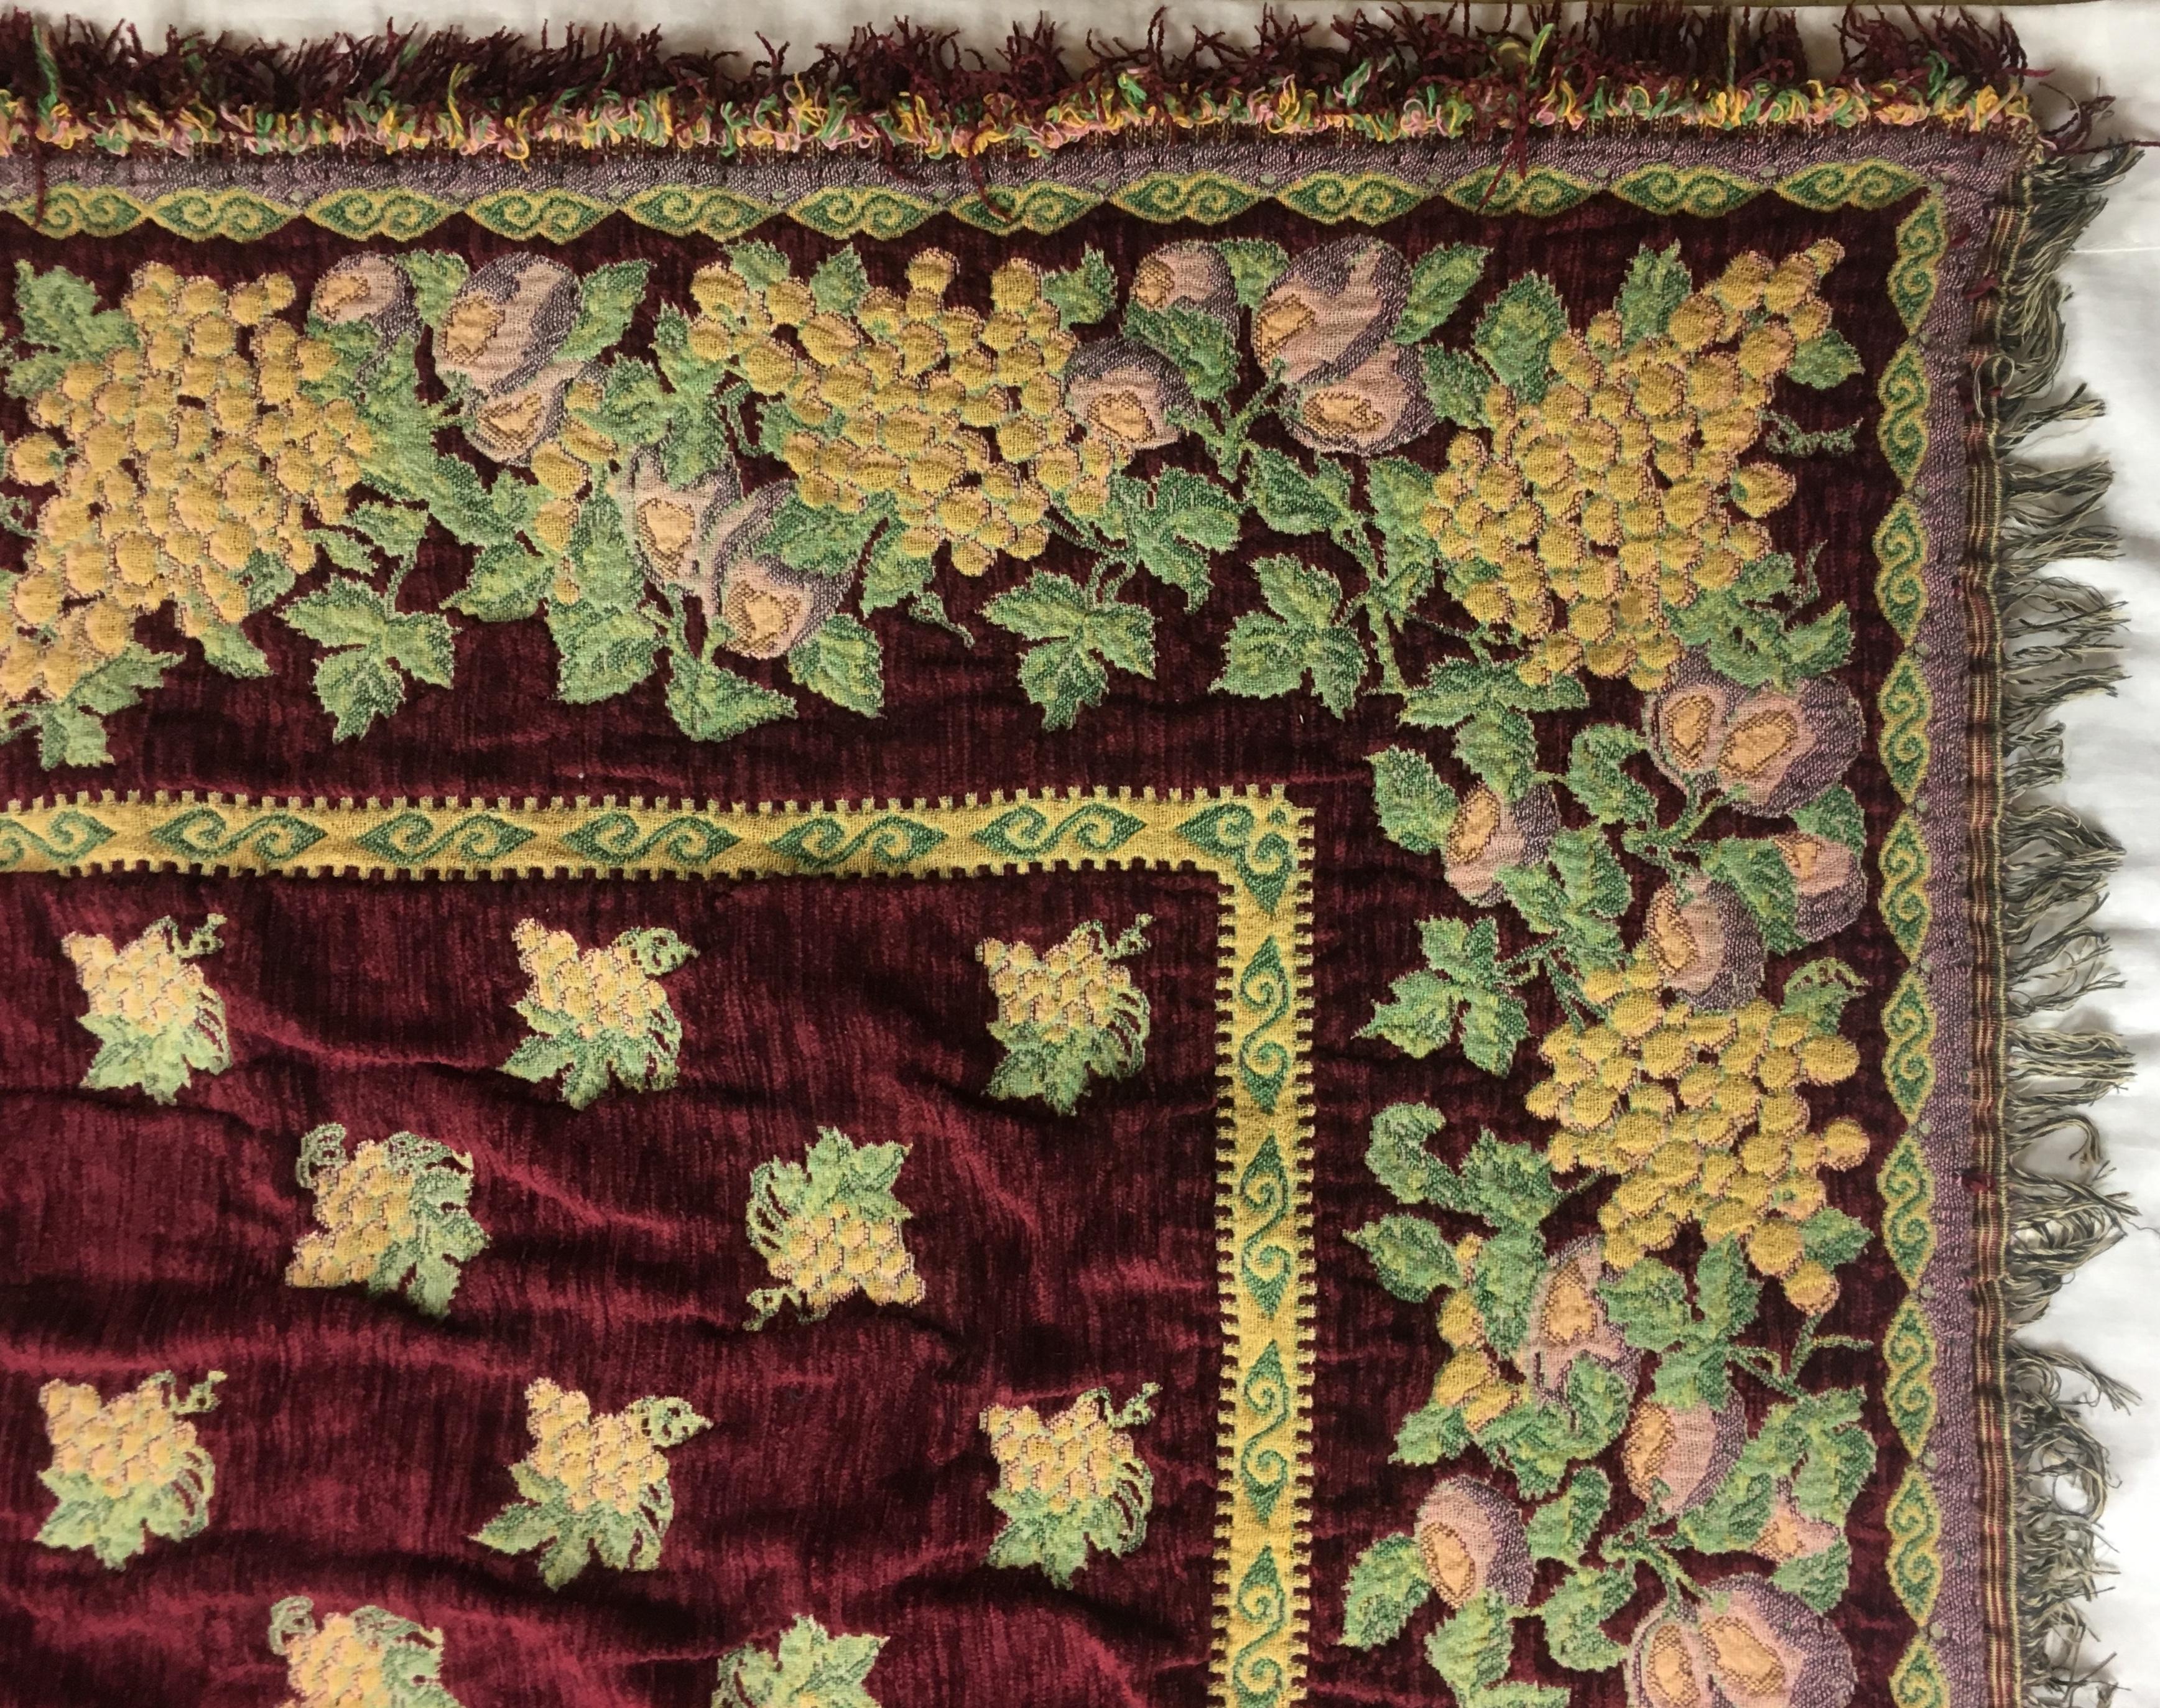 Vintage French Autumn Themed Tablecloth 1